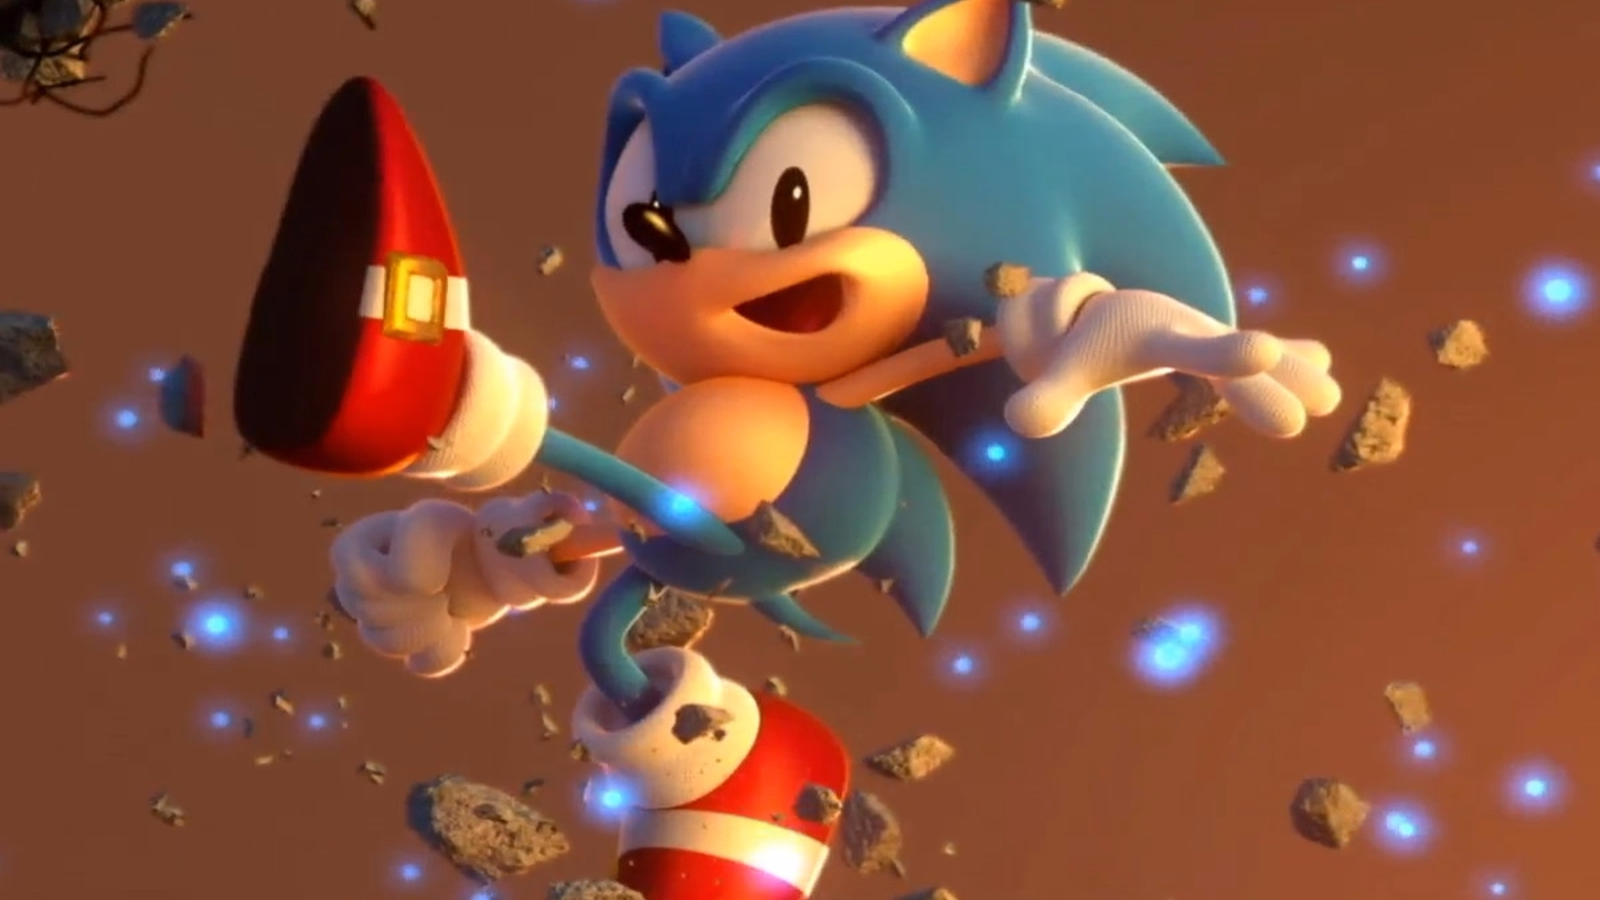 Sonic Forces focuses on PS4 with clear issues on other systems